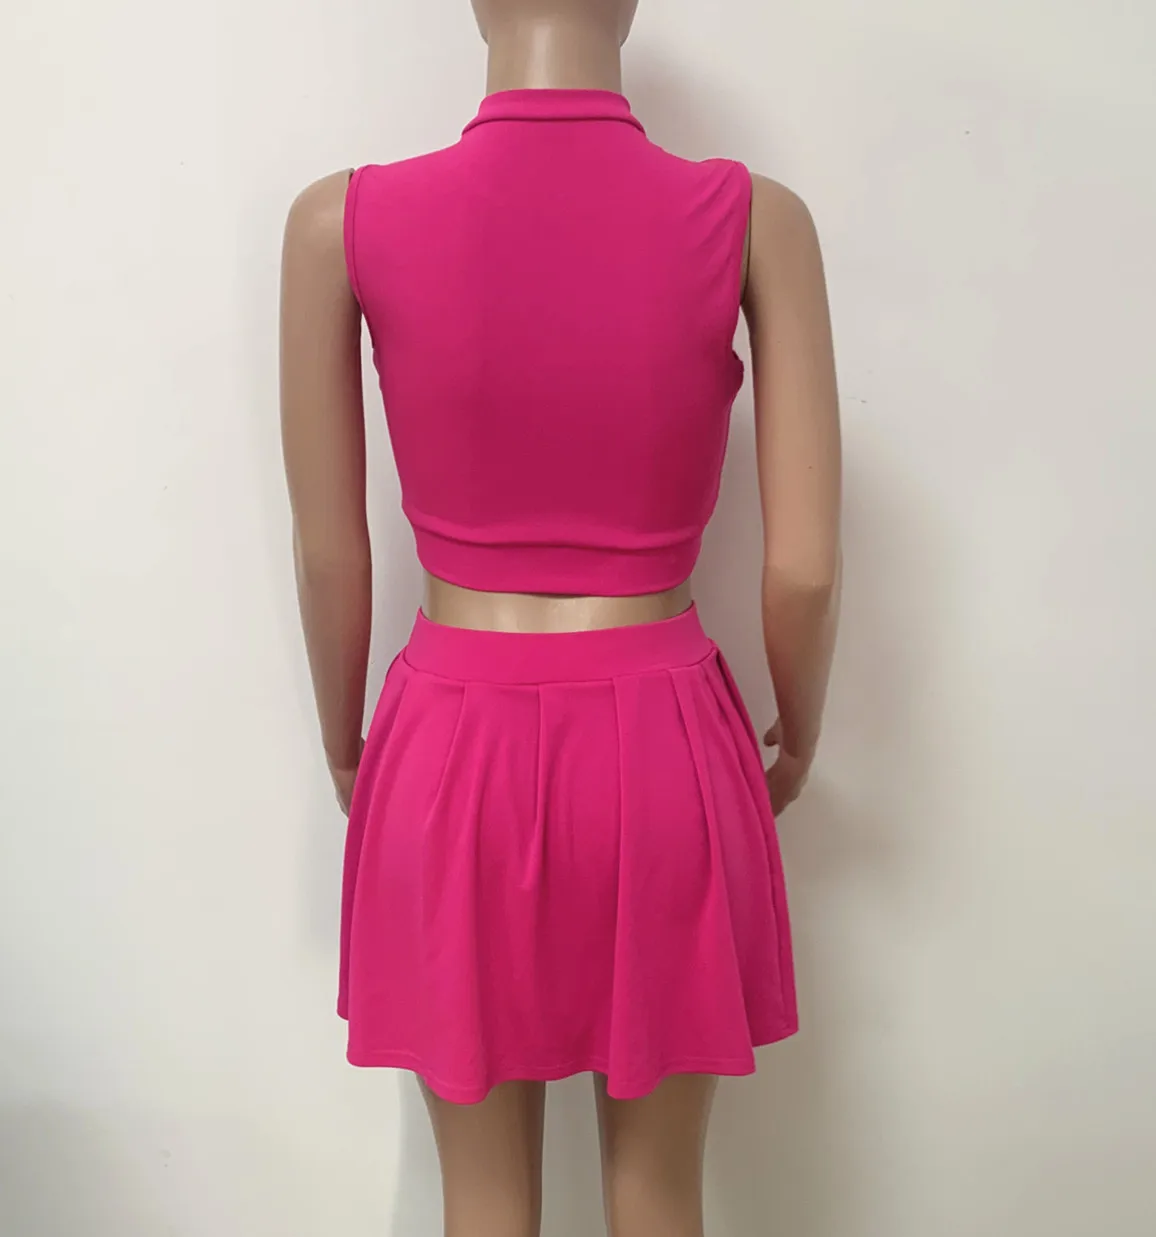 Summer Sleeveless Pleated Skirt Short Sets Women Sleeveless Crop Top and Mini Skirts Sexy Two Piece Sets 2021 Casual Clothings pant suit